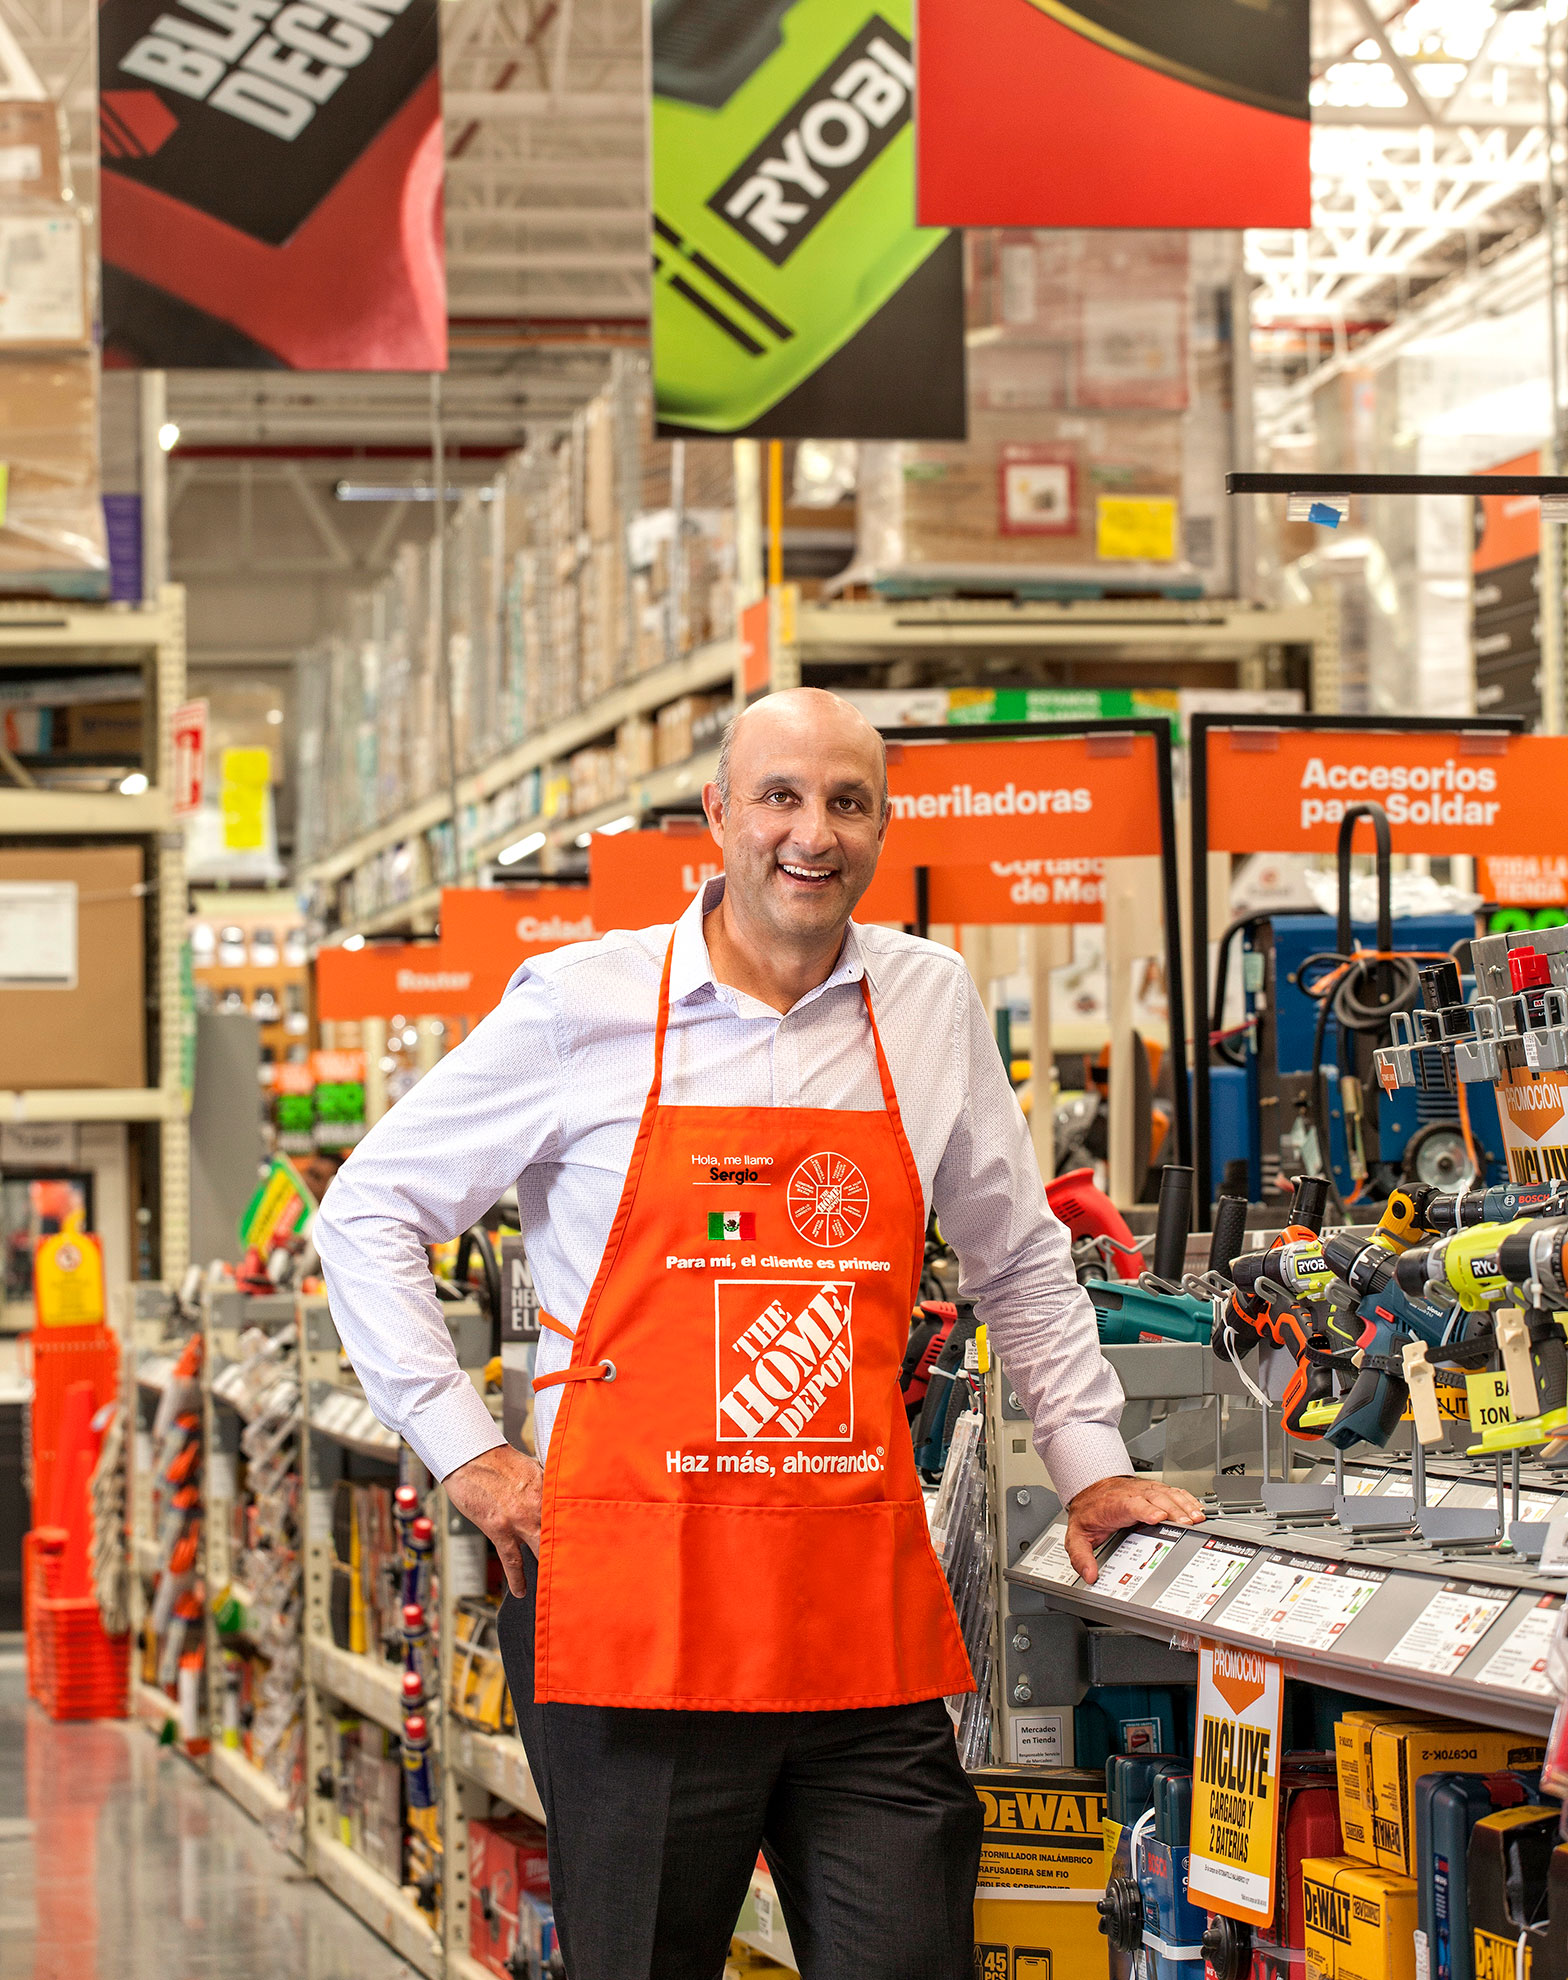 Home Depot vs. Lowe’s — which is the winner? MarketWatch